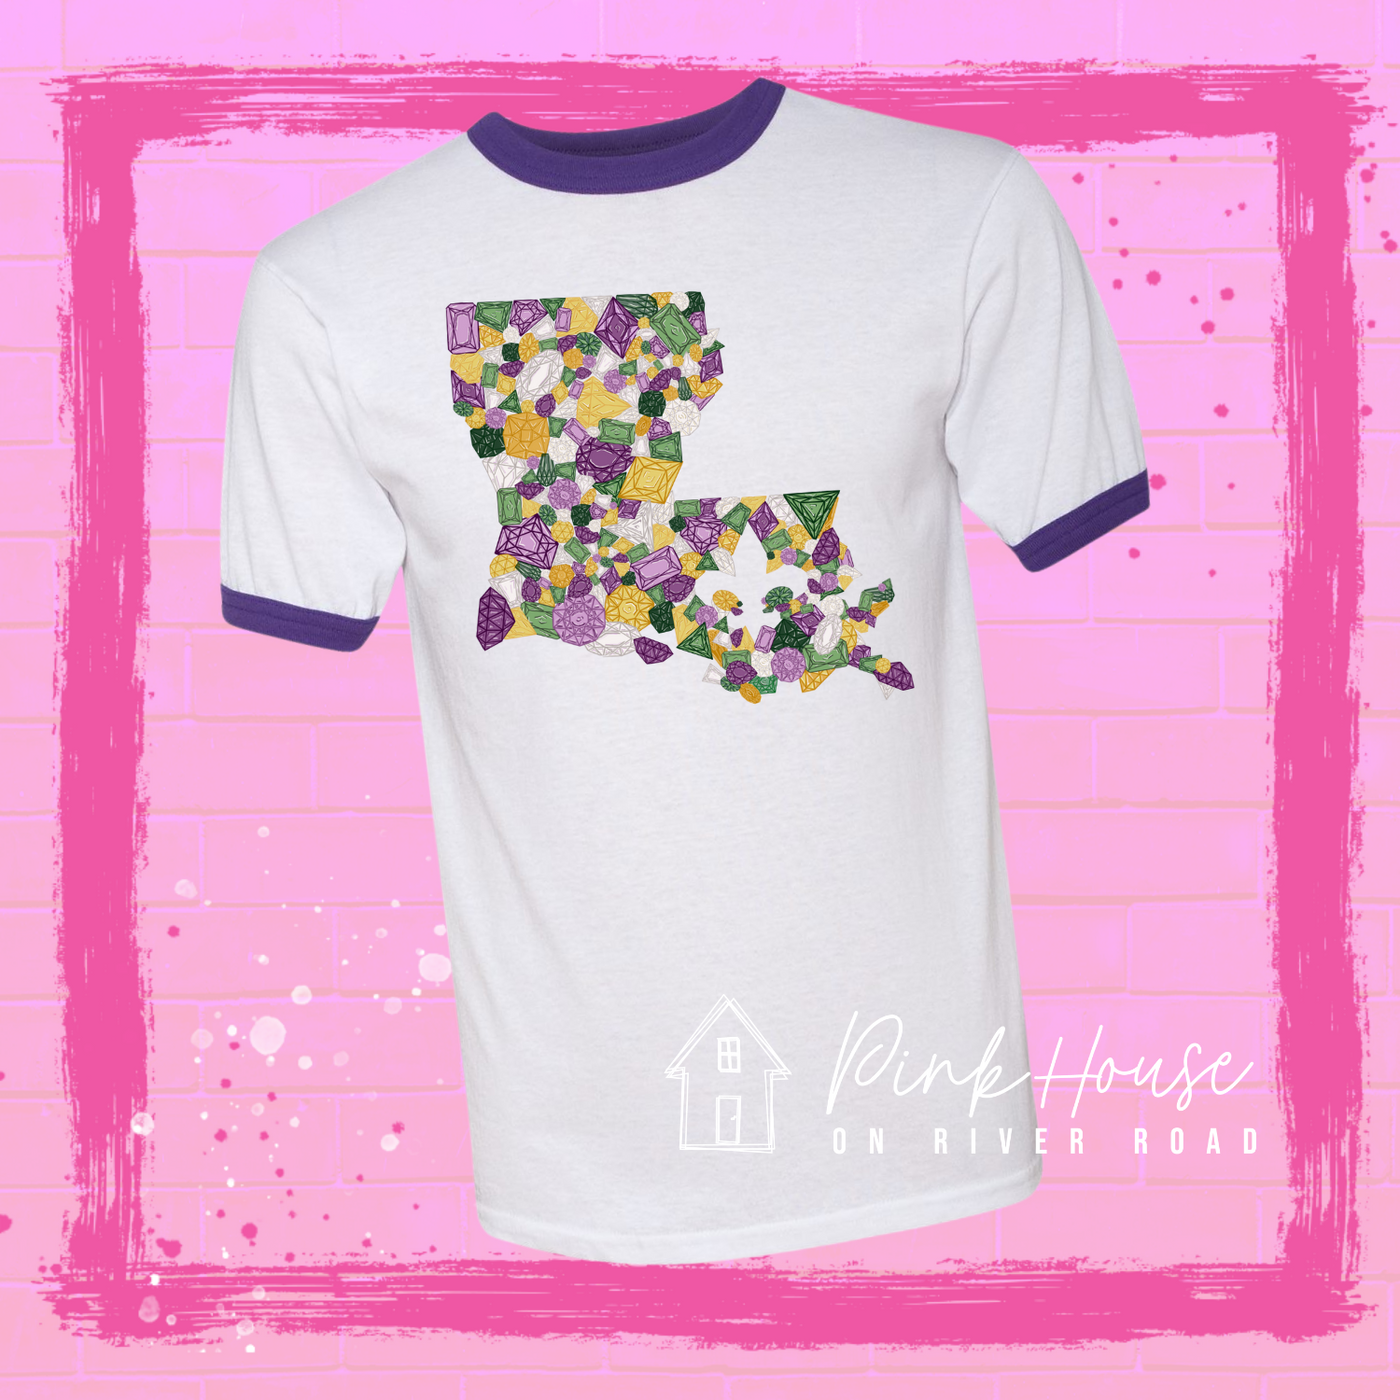 White & Purple Ringer tee with a graphic of the state of Louisiana compromised of different shapes and sizes of purple, green, yellow and clear jewels.